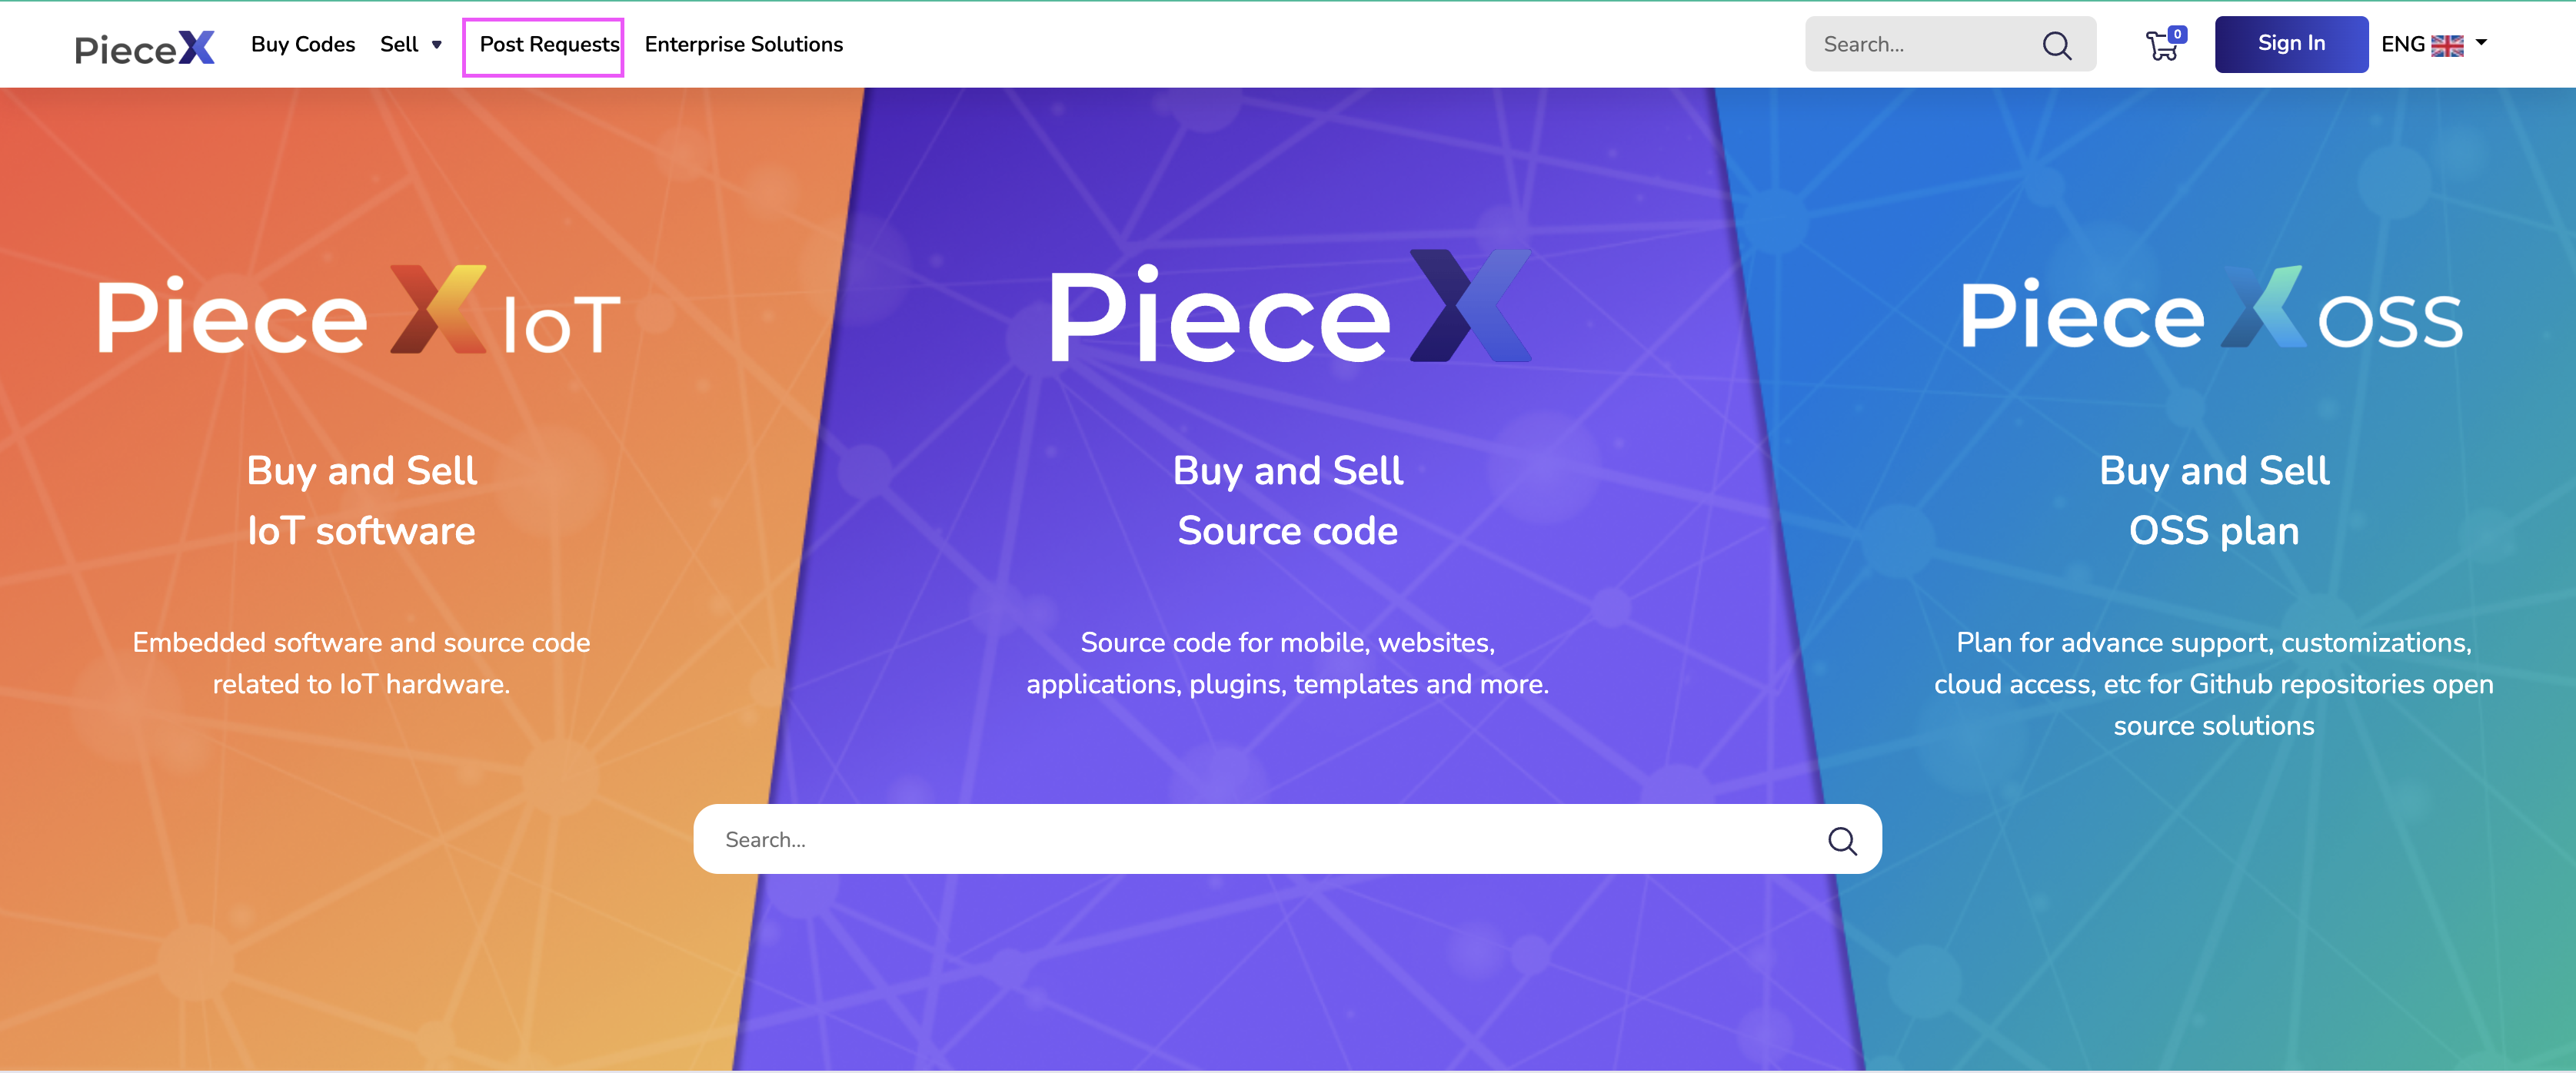 How to request Source Code on PieceX - Access Post Requests